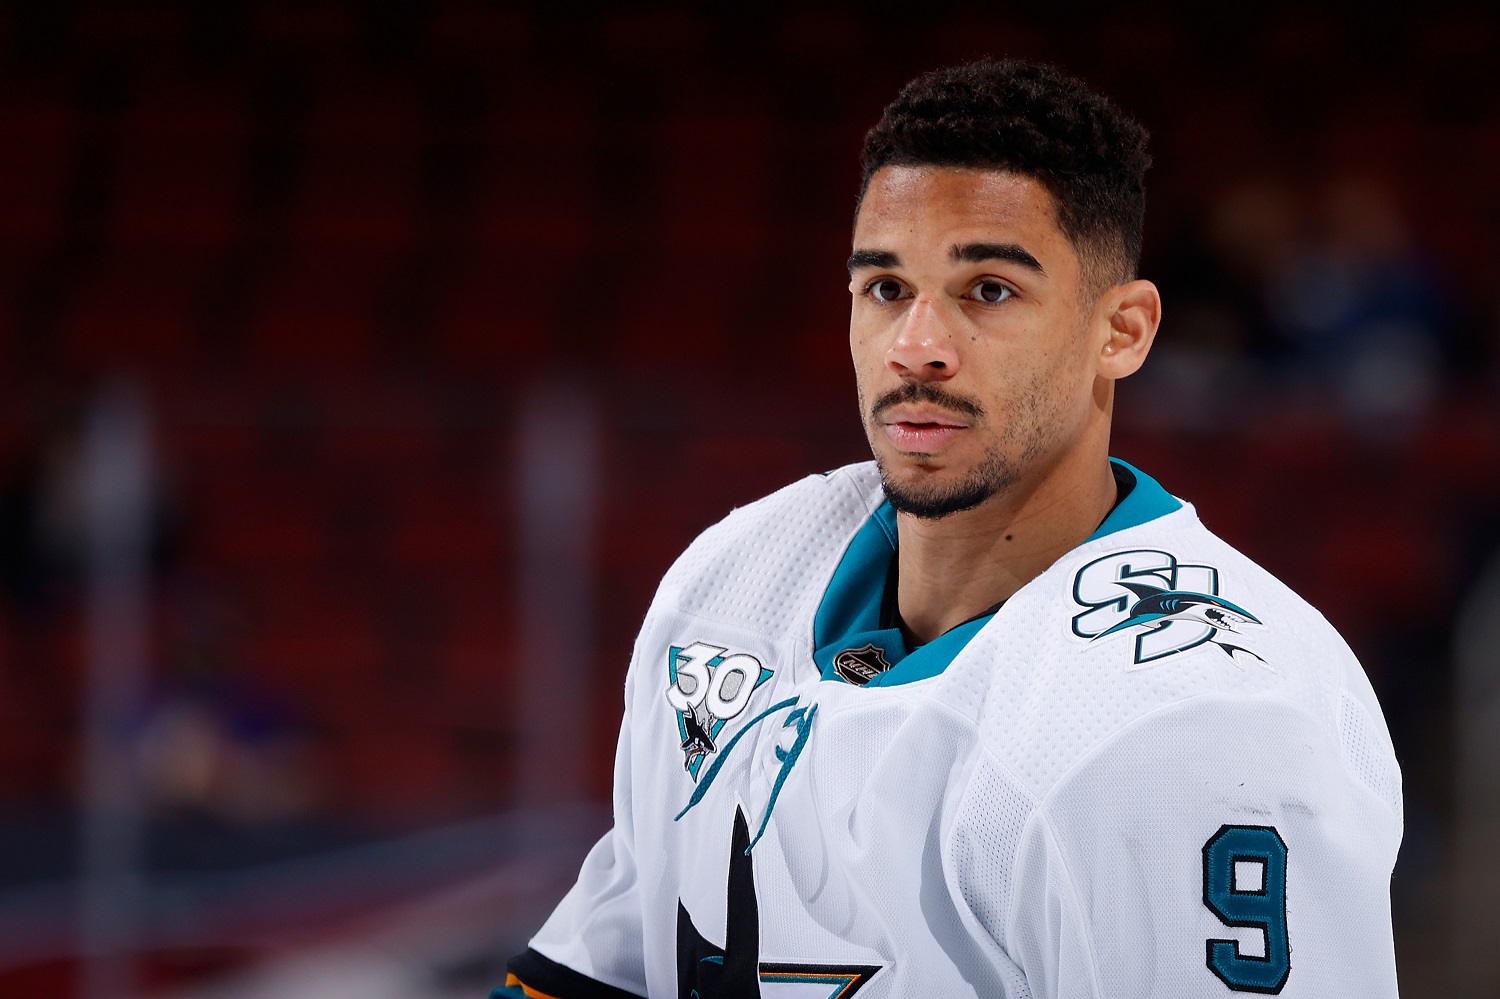 NHL Star Evander Kane’s Next Penalty Could Cost Him More Than 2 Minutes in the Box